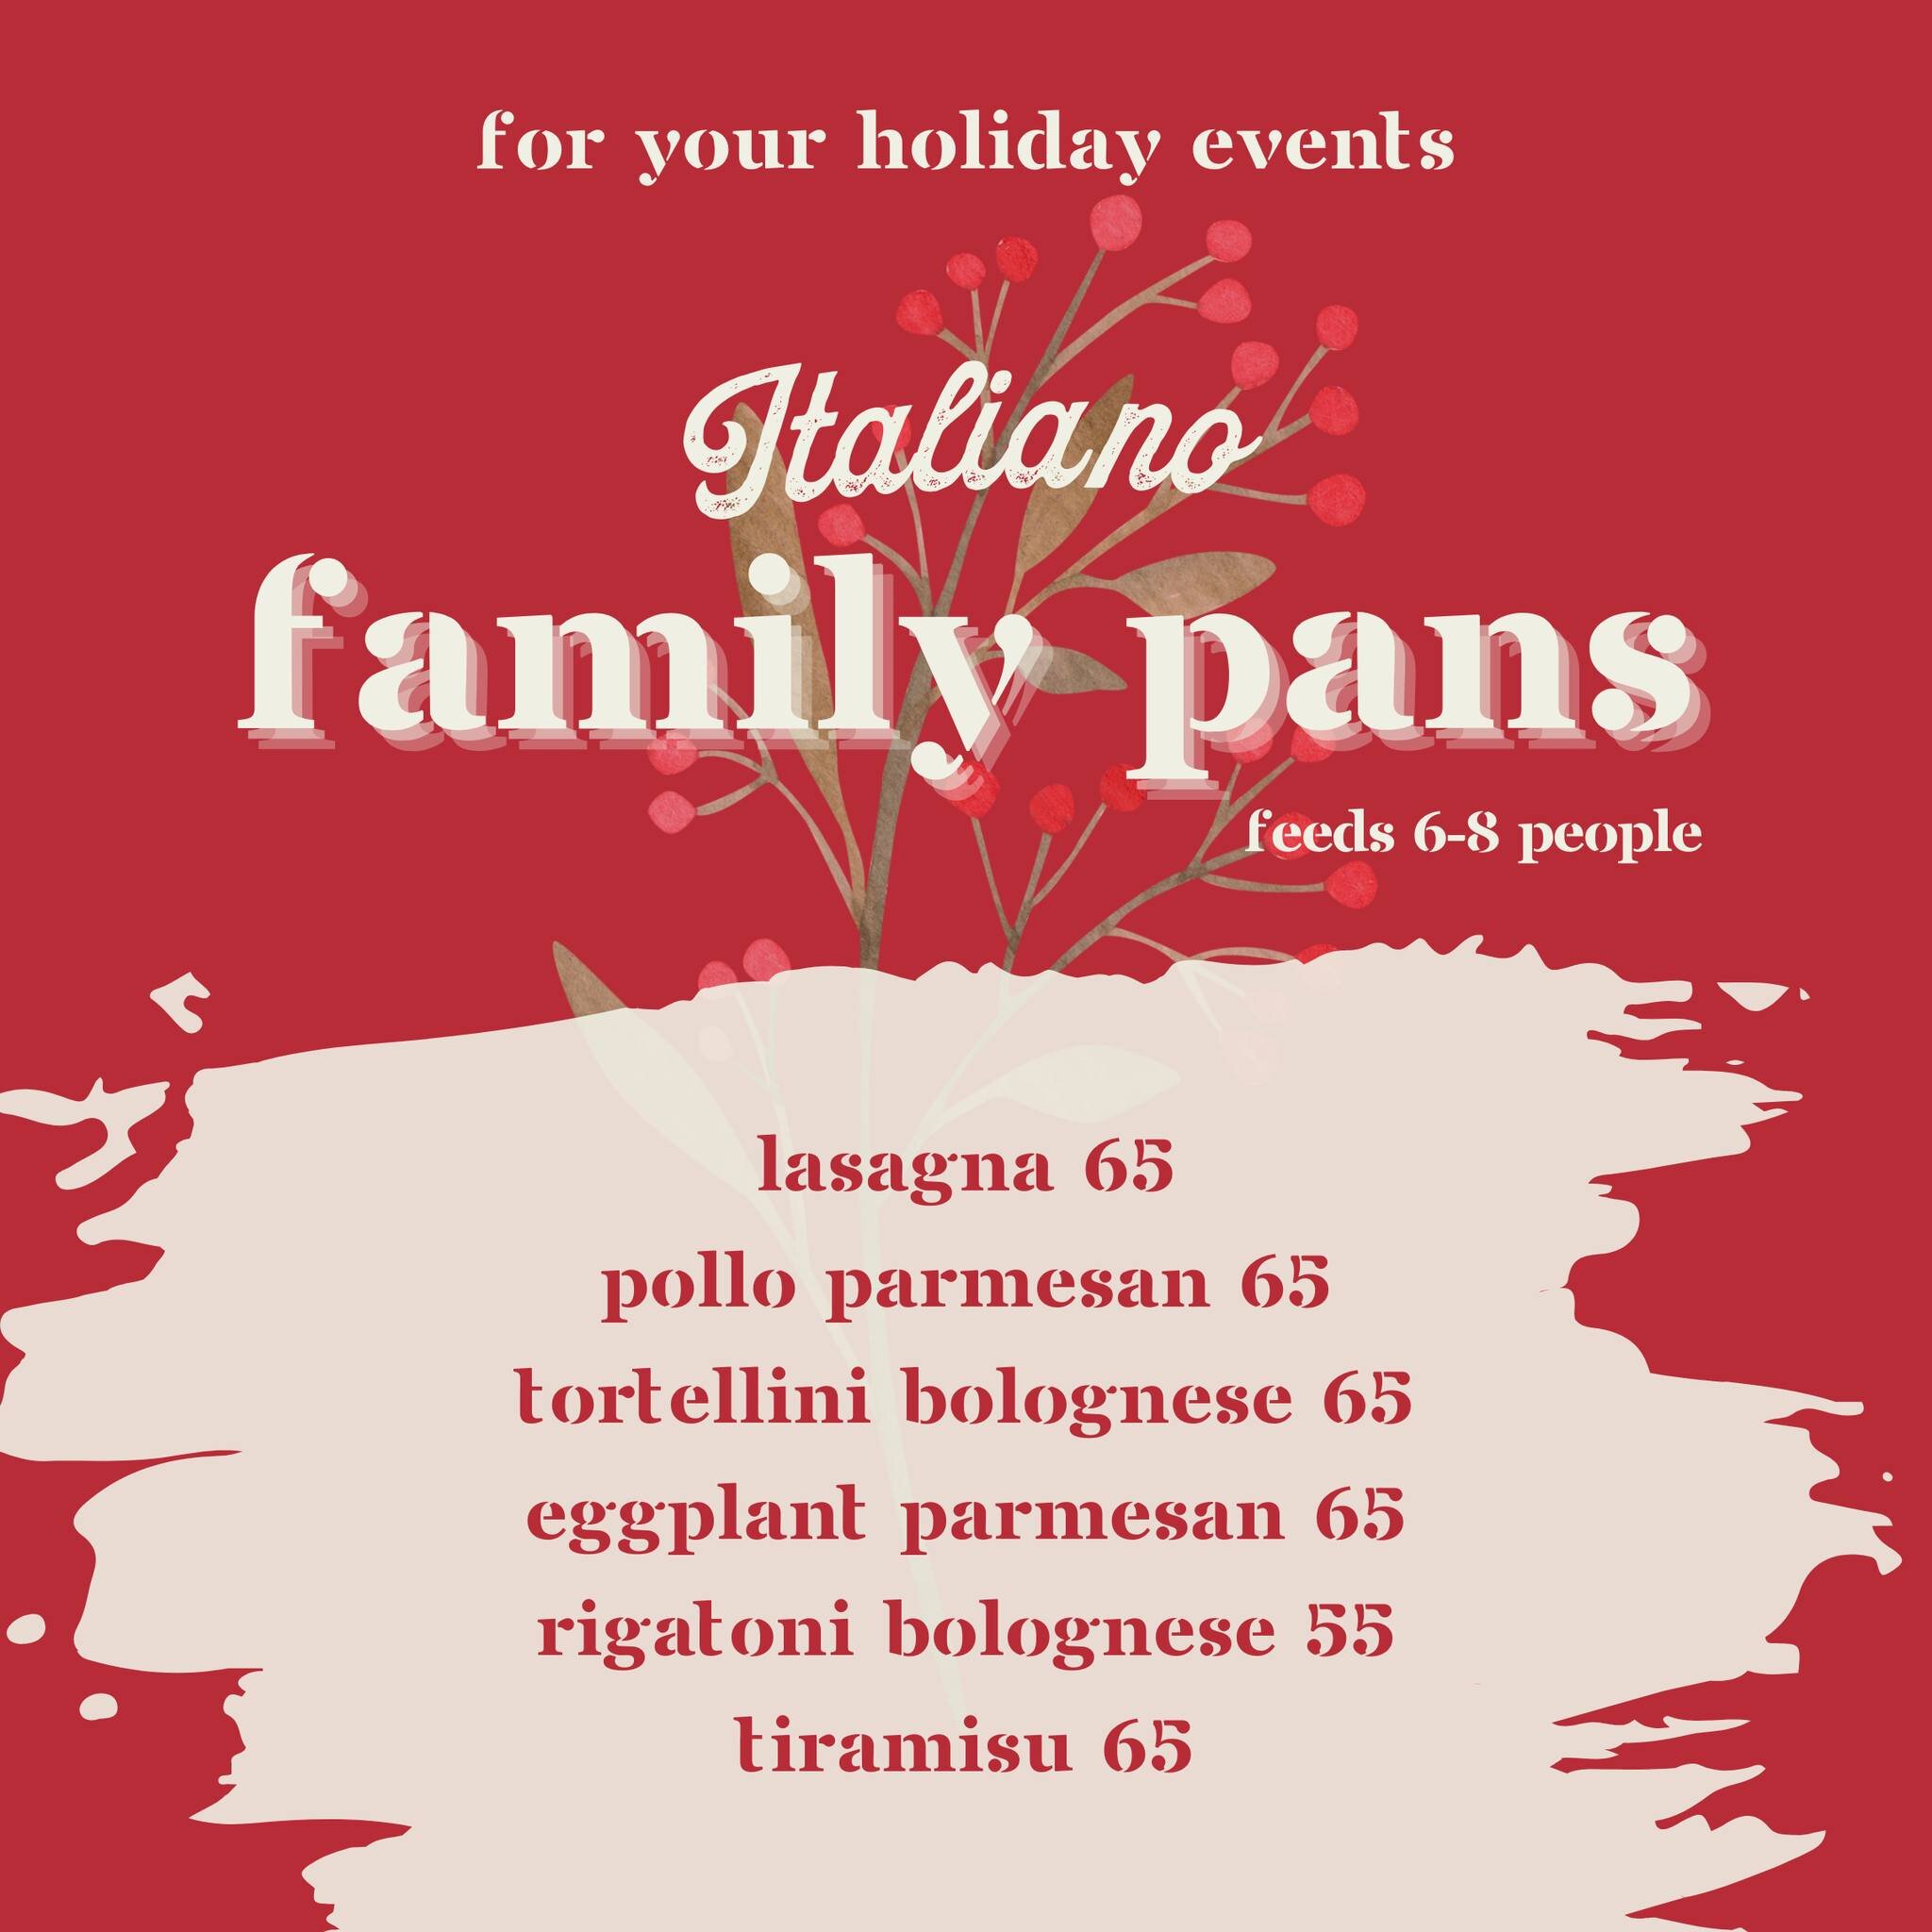 Just in time for your holiday feasts: try our Italiano Family Pans for your upcoming festivities! Each pan serves about 6-8 people. Call (774) 241-0478 to order. Orders require at least a 1-day lead time. As a reminder, we are closed on Thanksgiving.